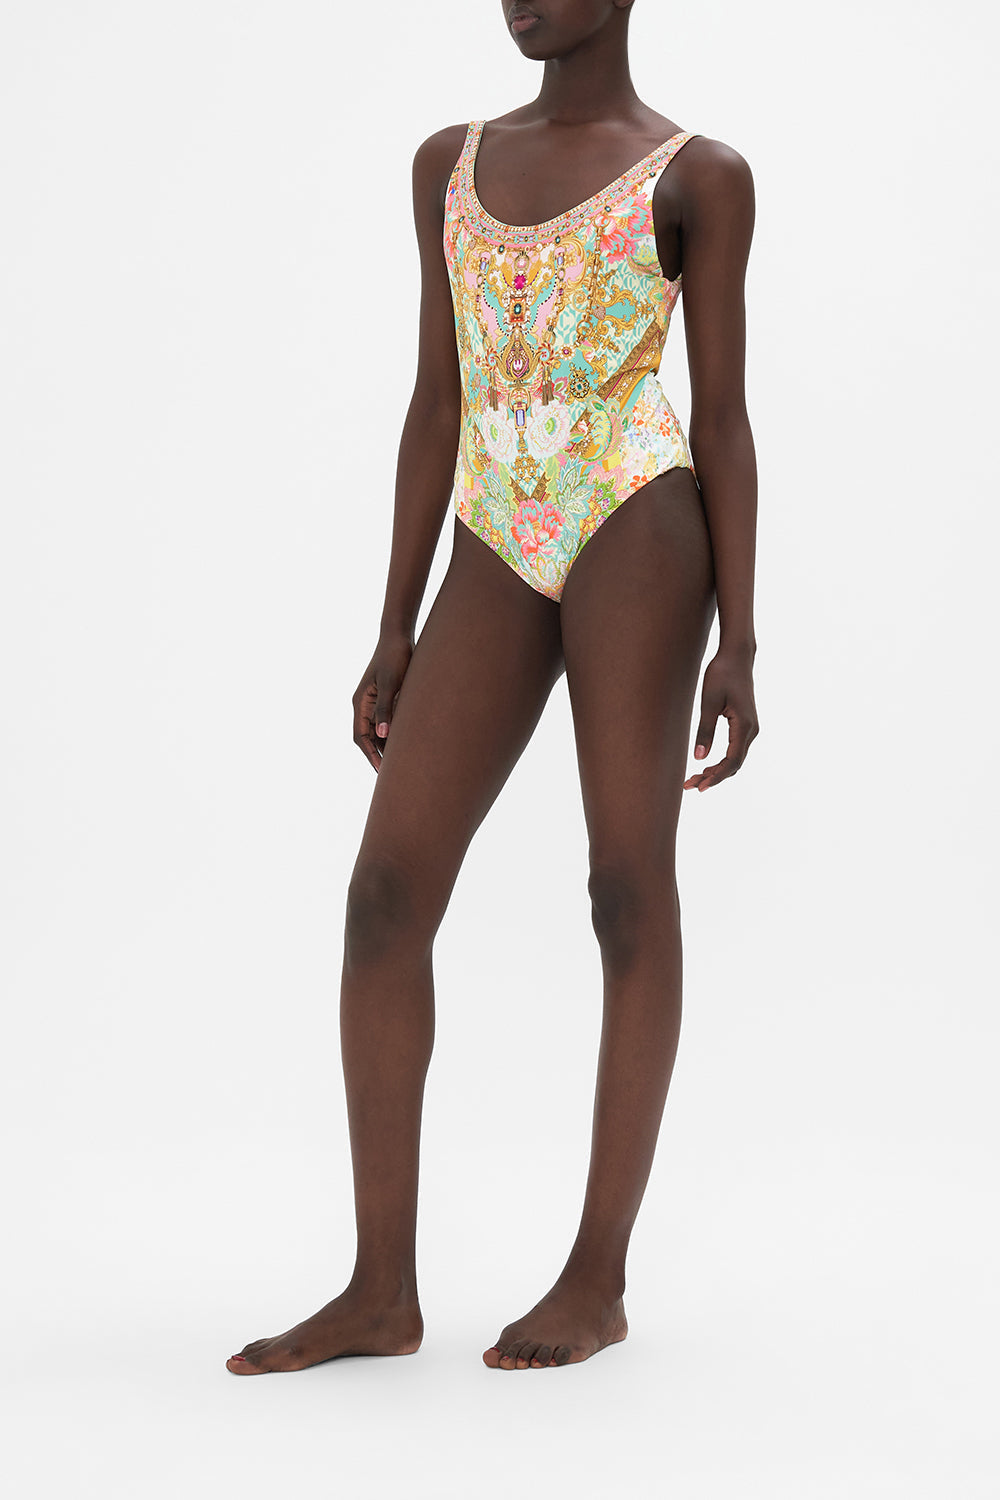 Product view of CAMILLA swimwear reversible one piece swimsuit in An Italian Welcome print